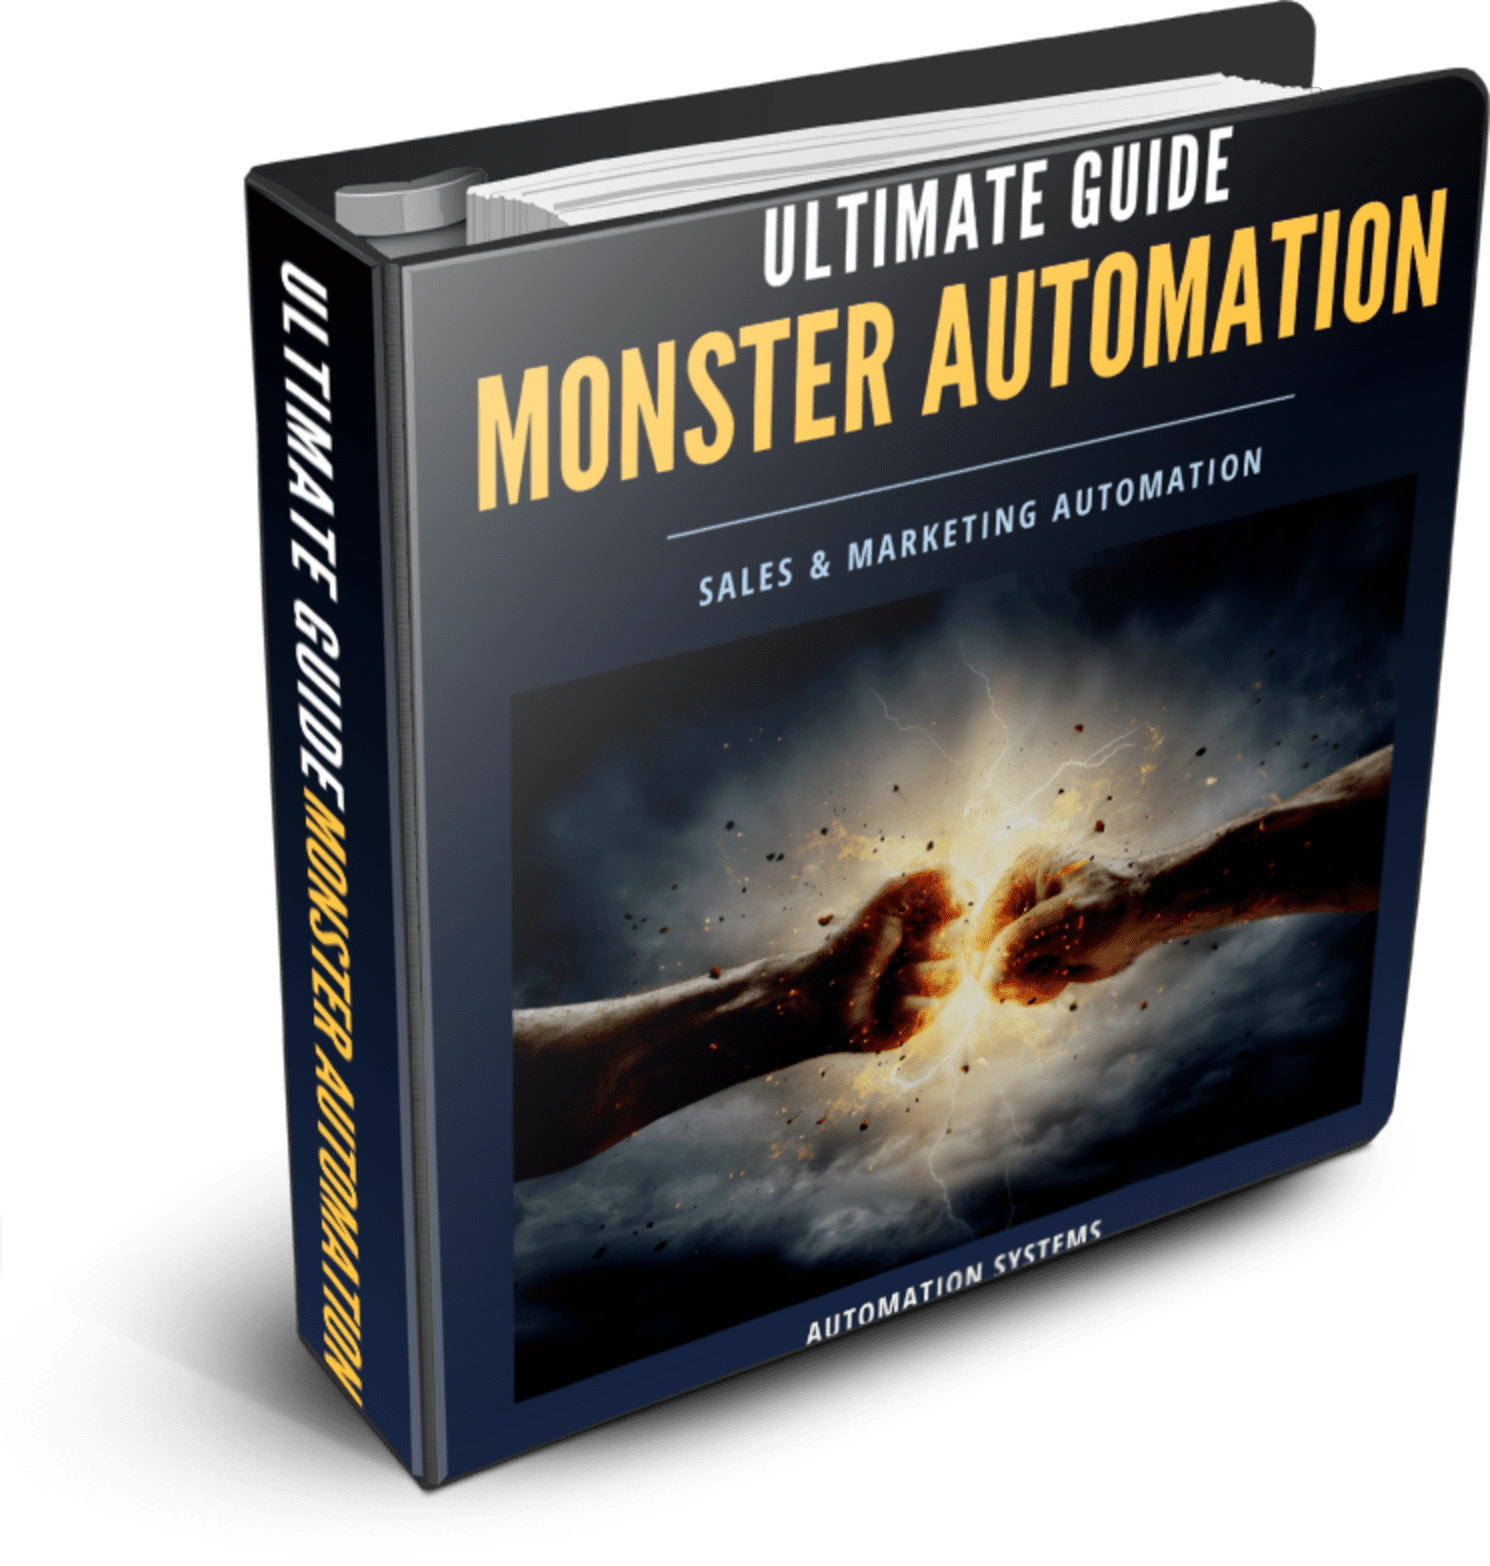 Ultimate Guide to Monster Automation